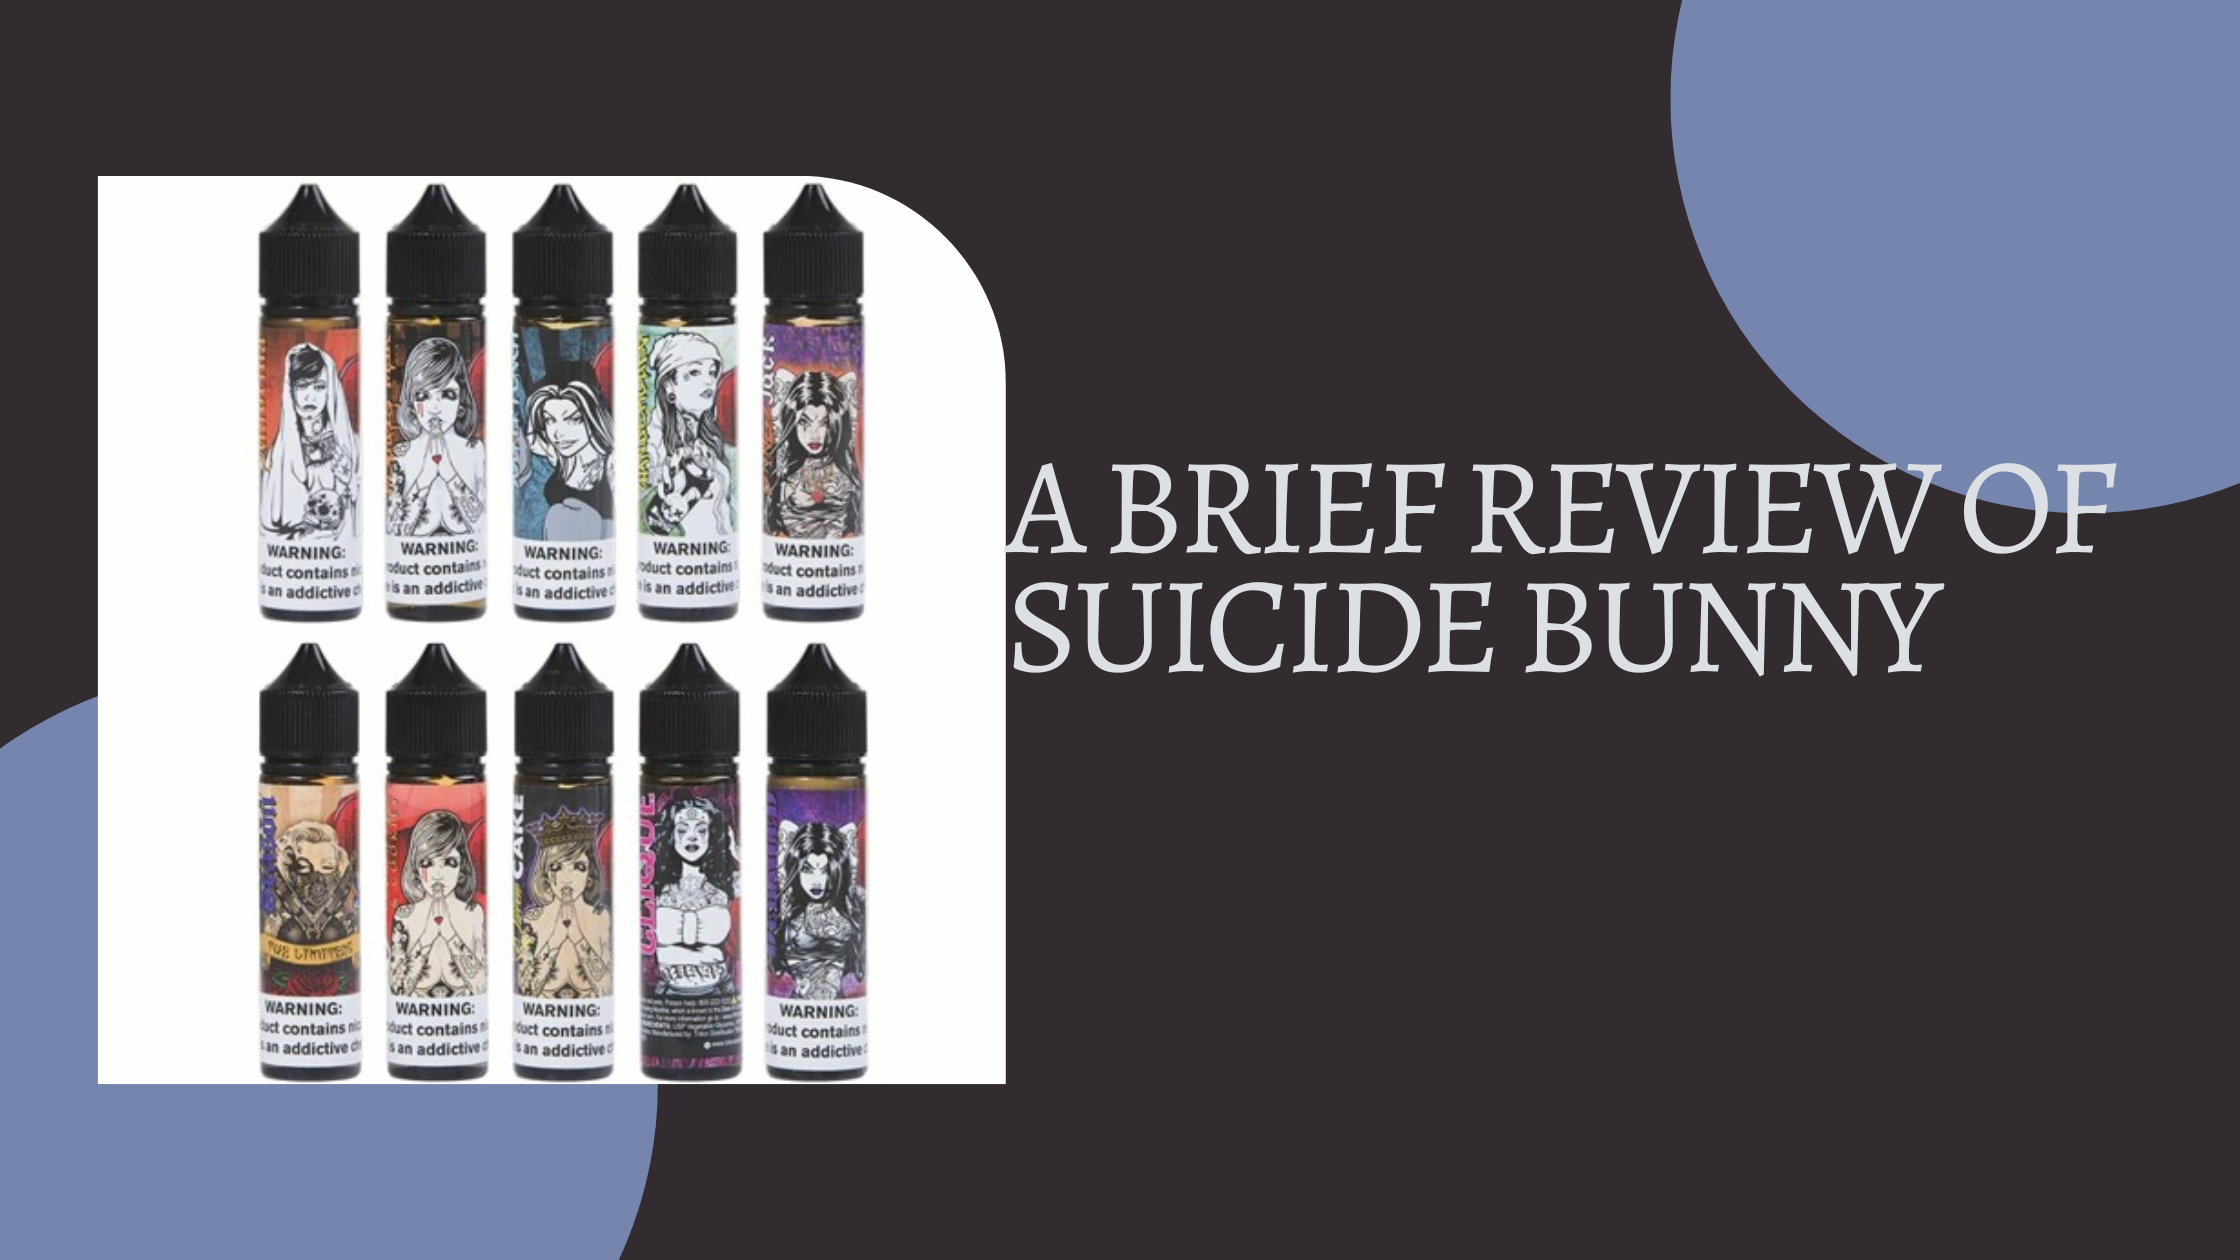 A Brief Review of Suicide Bunny